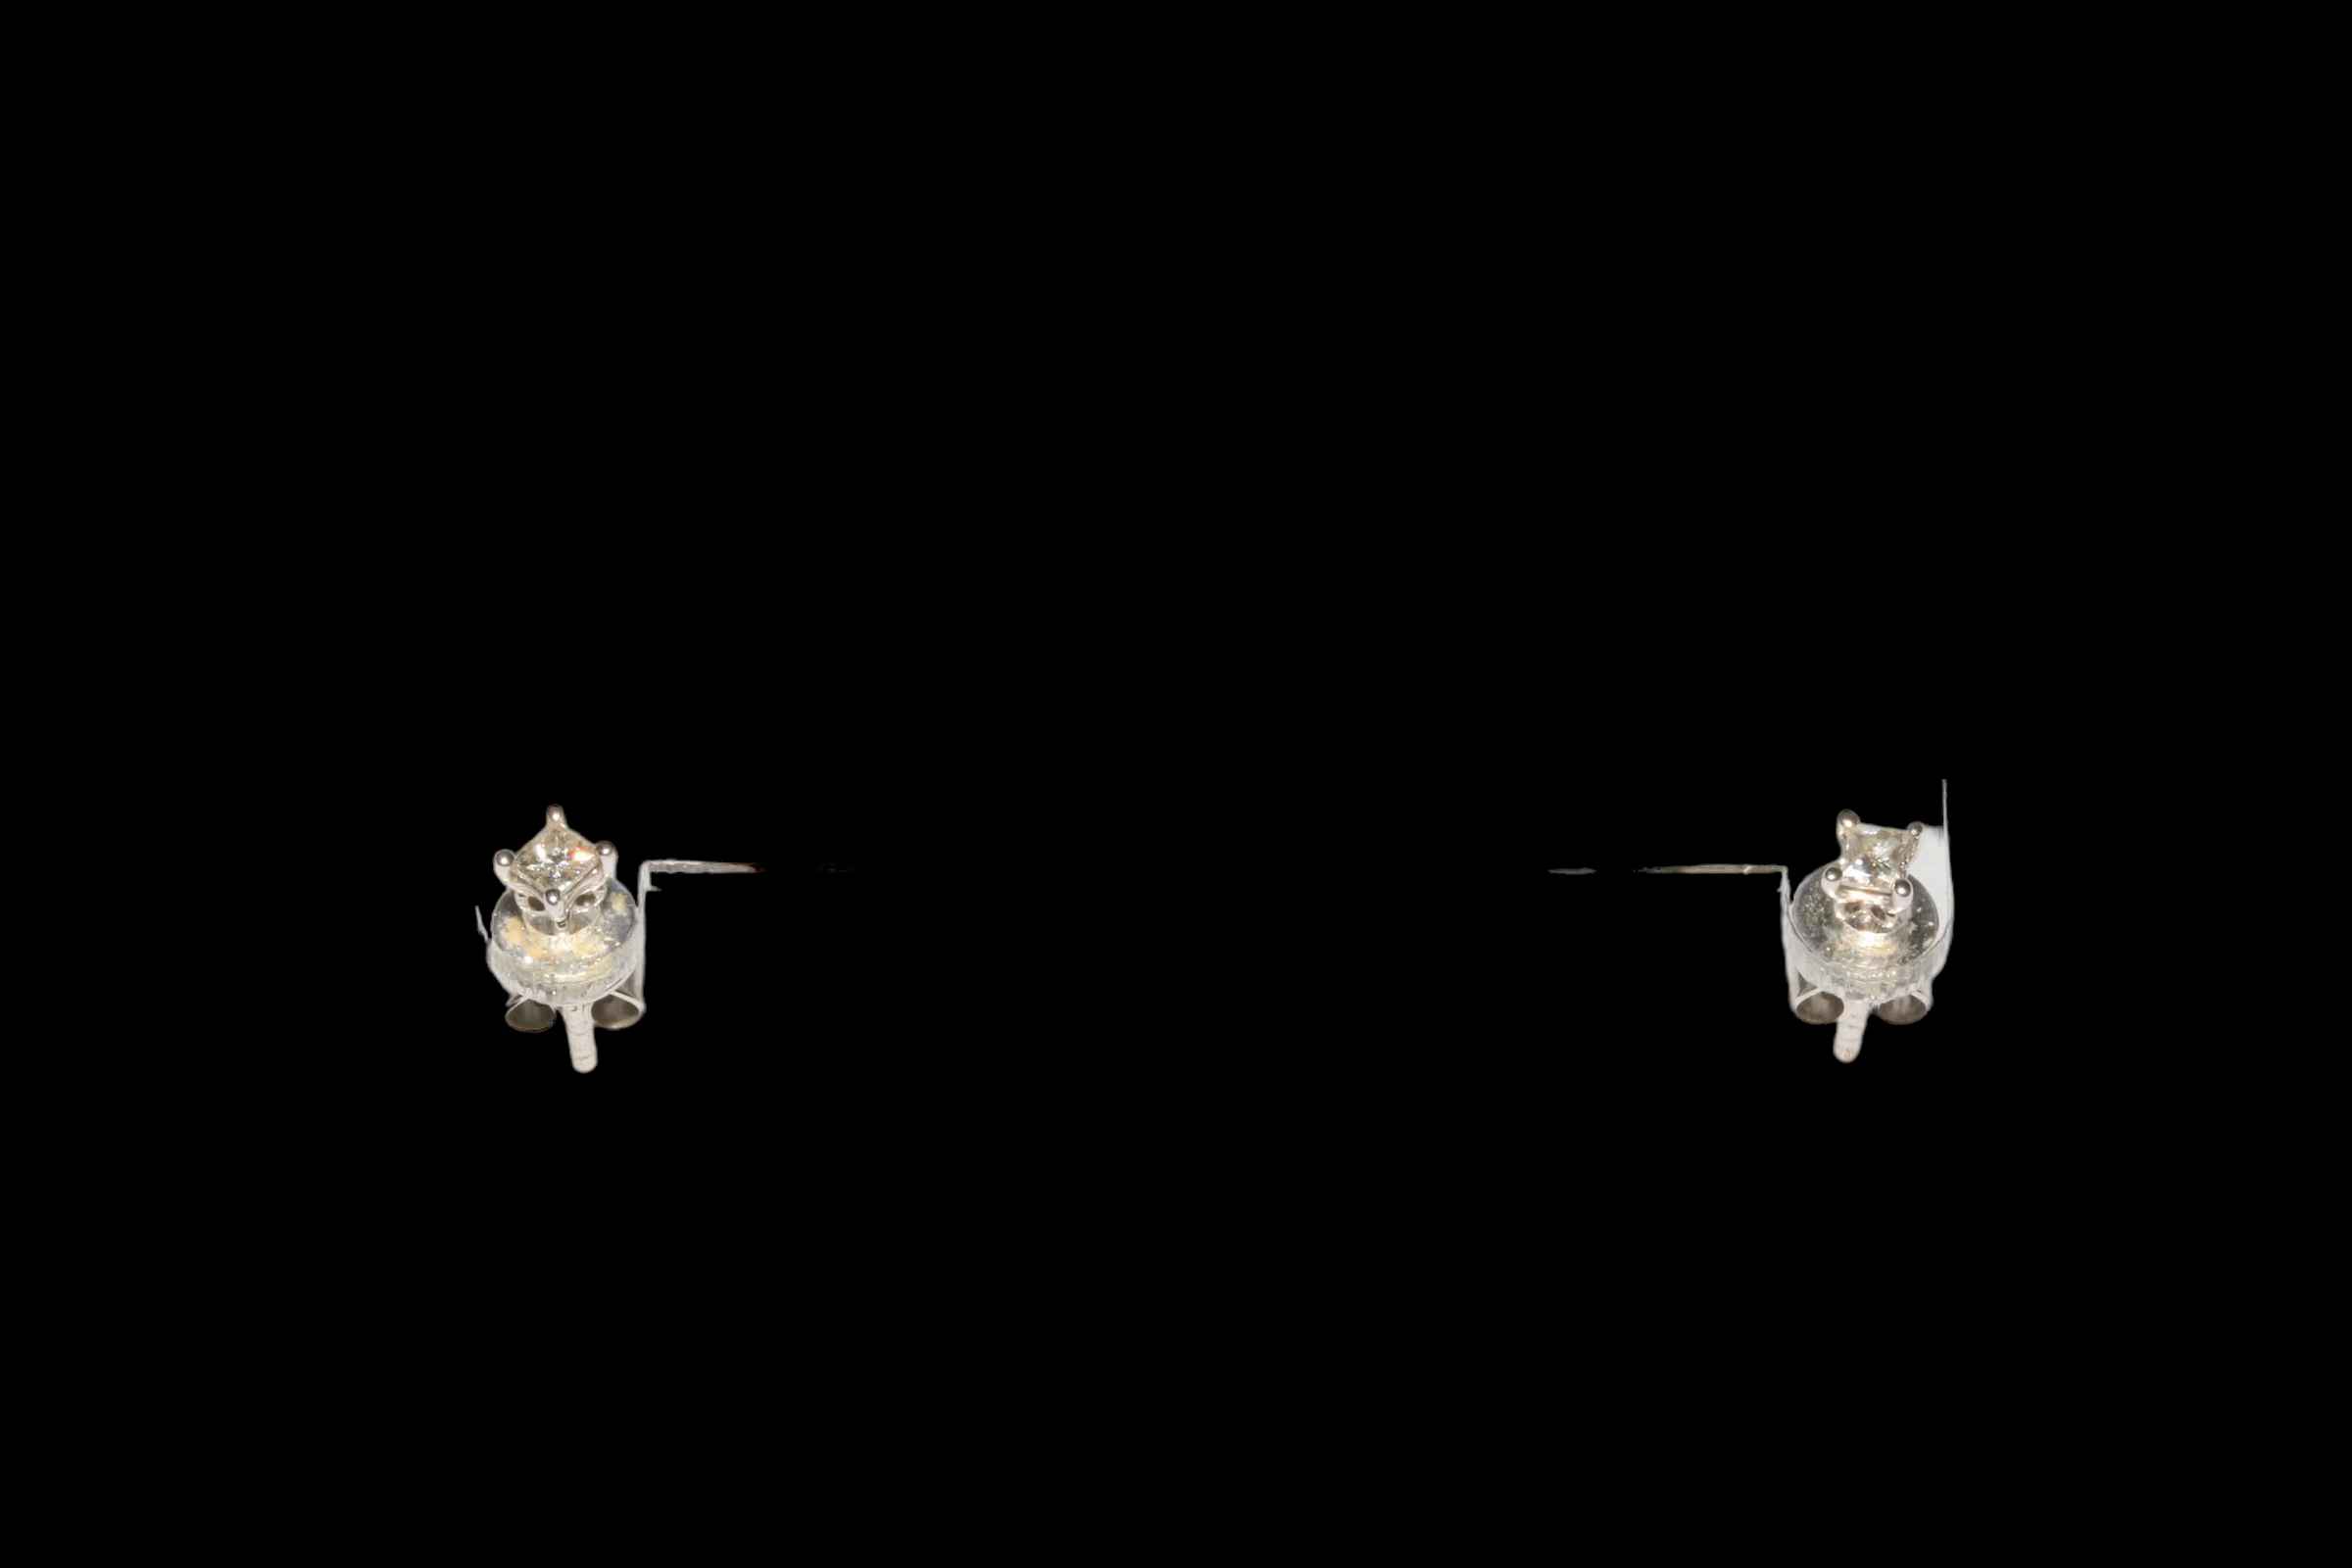 Diamond pendant and chain and matching diamond earrings set in 9 carat white gold. - Image 3 of 3